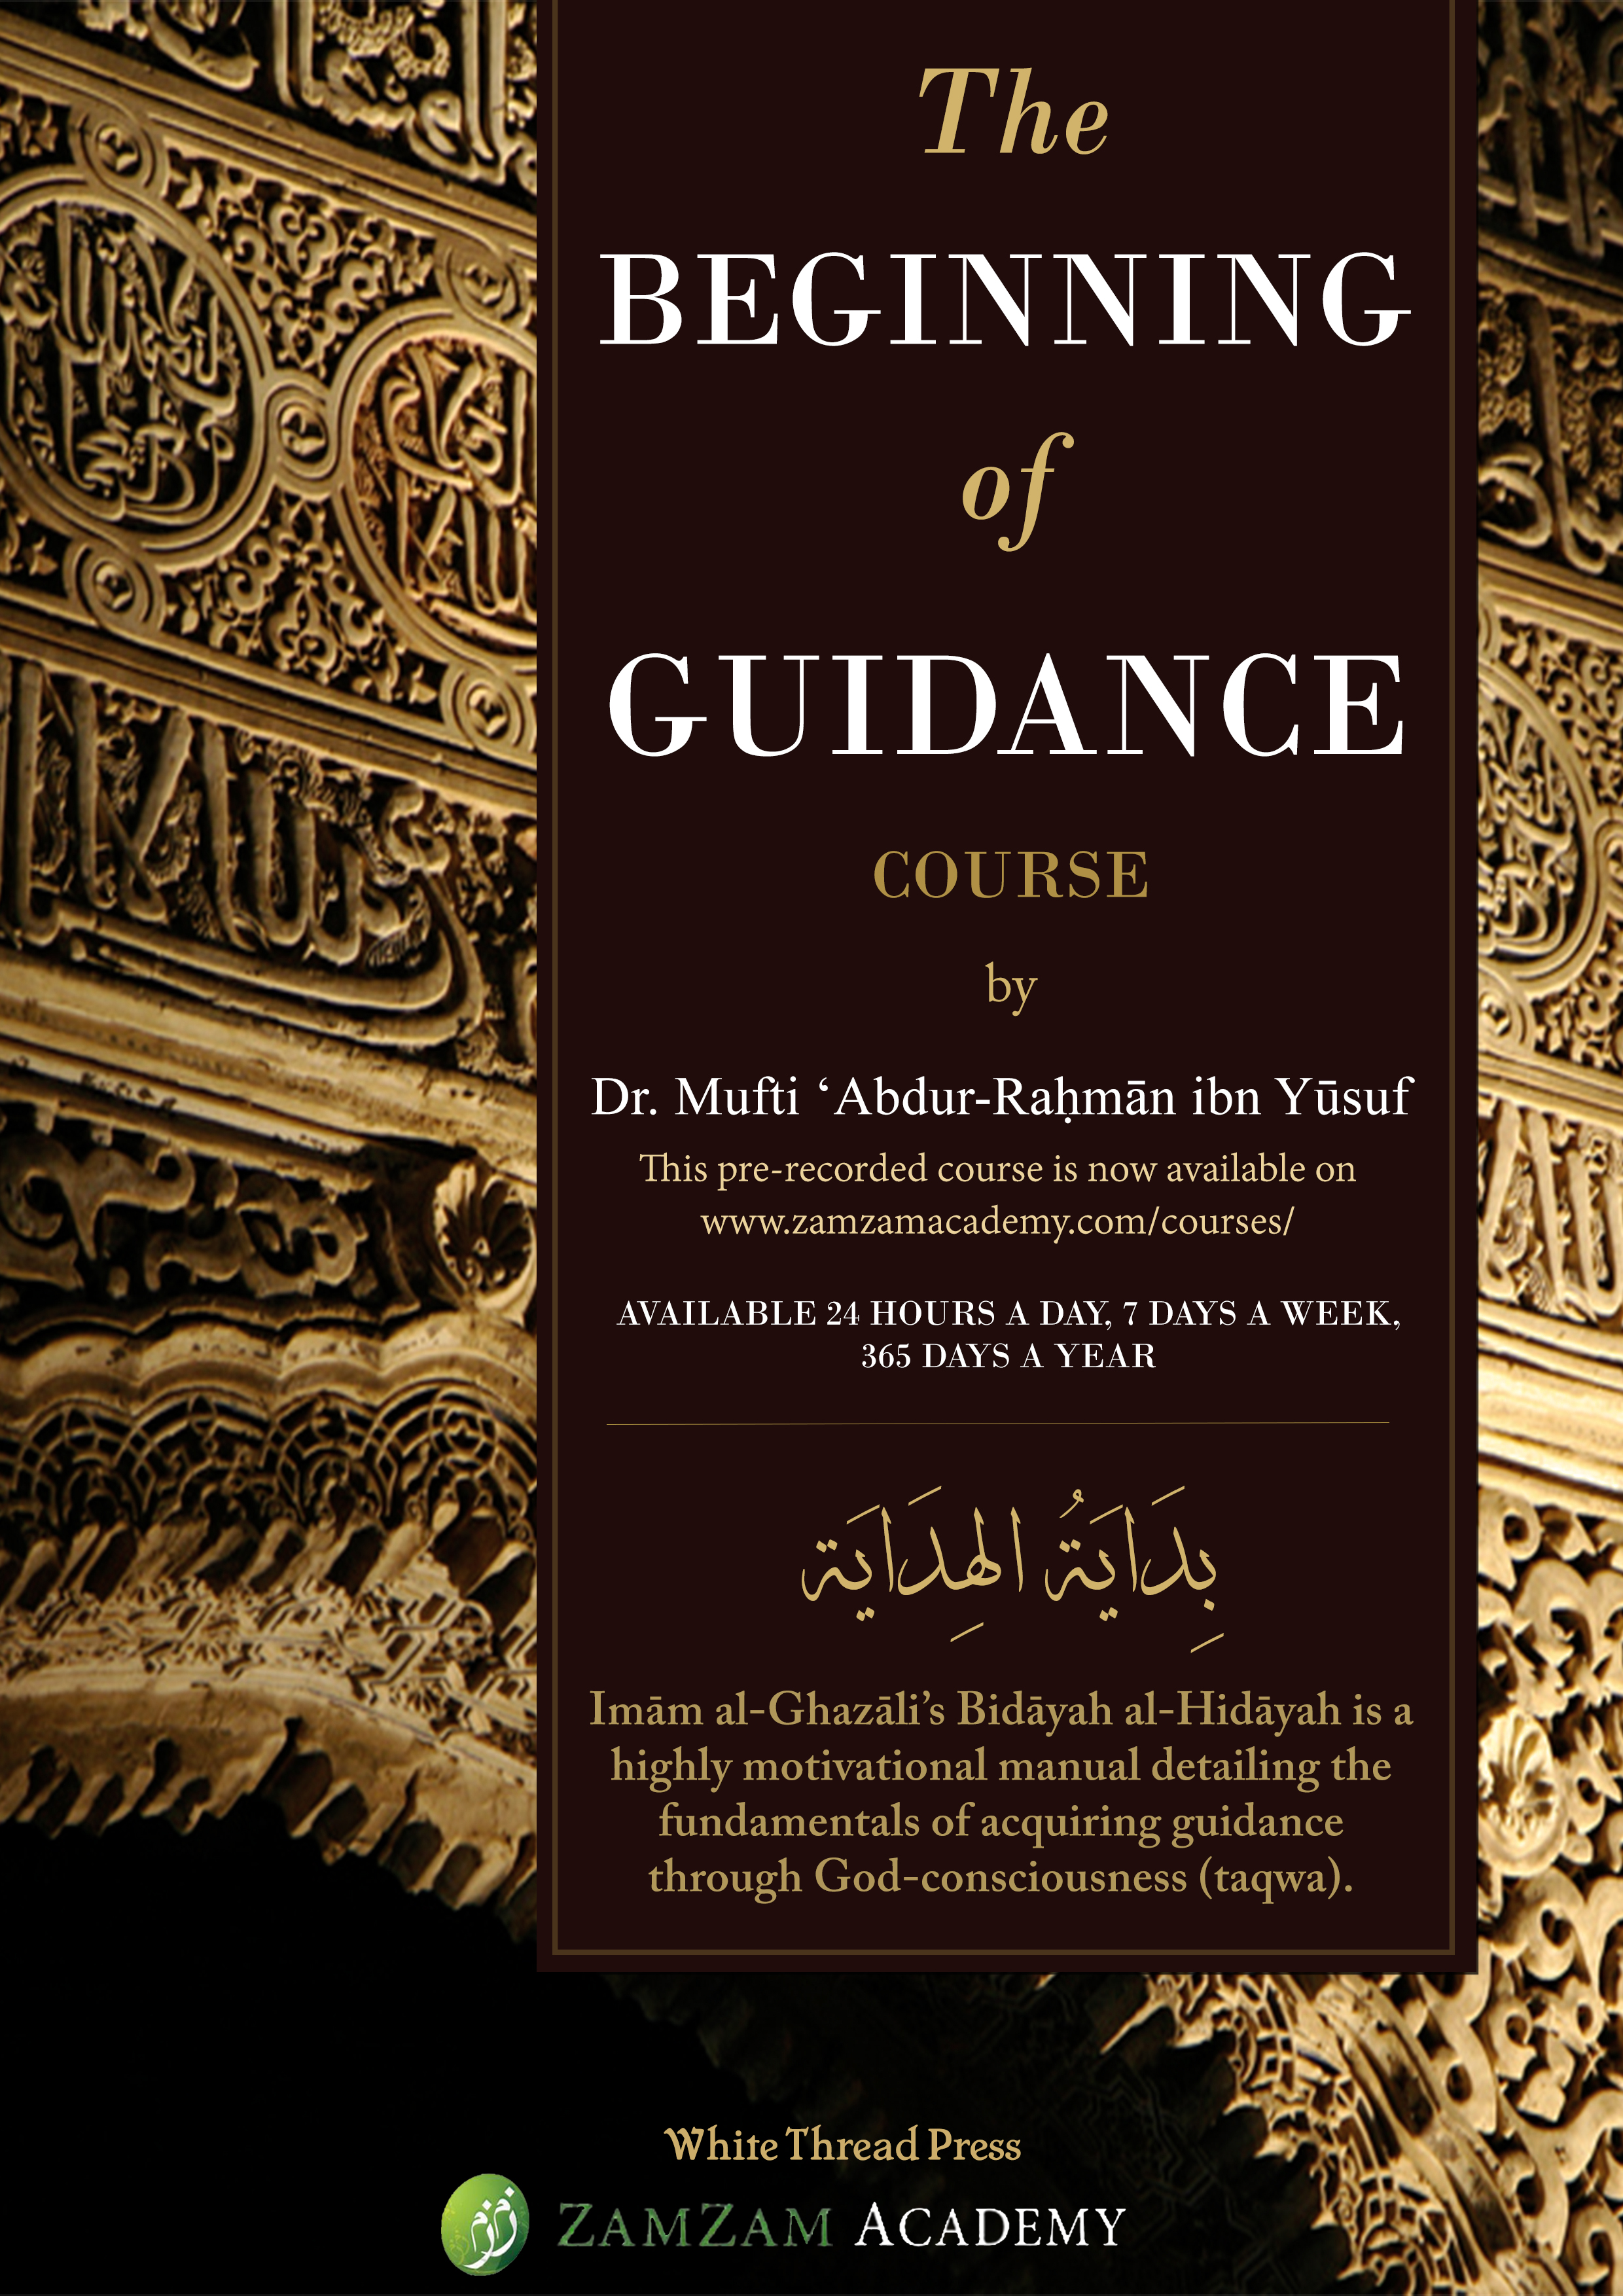 Book of guidance photo